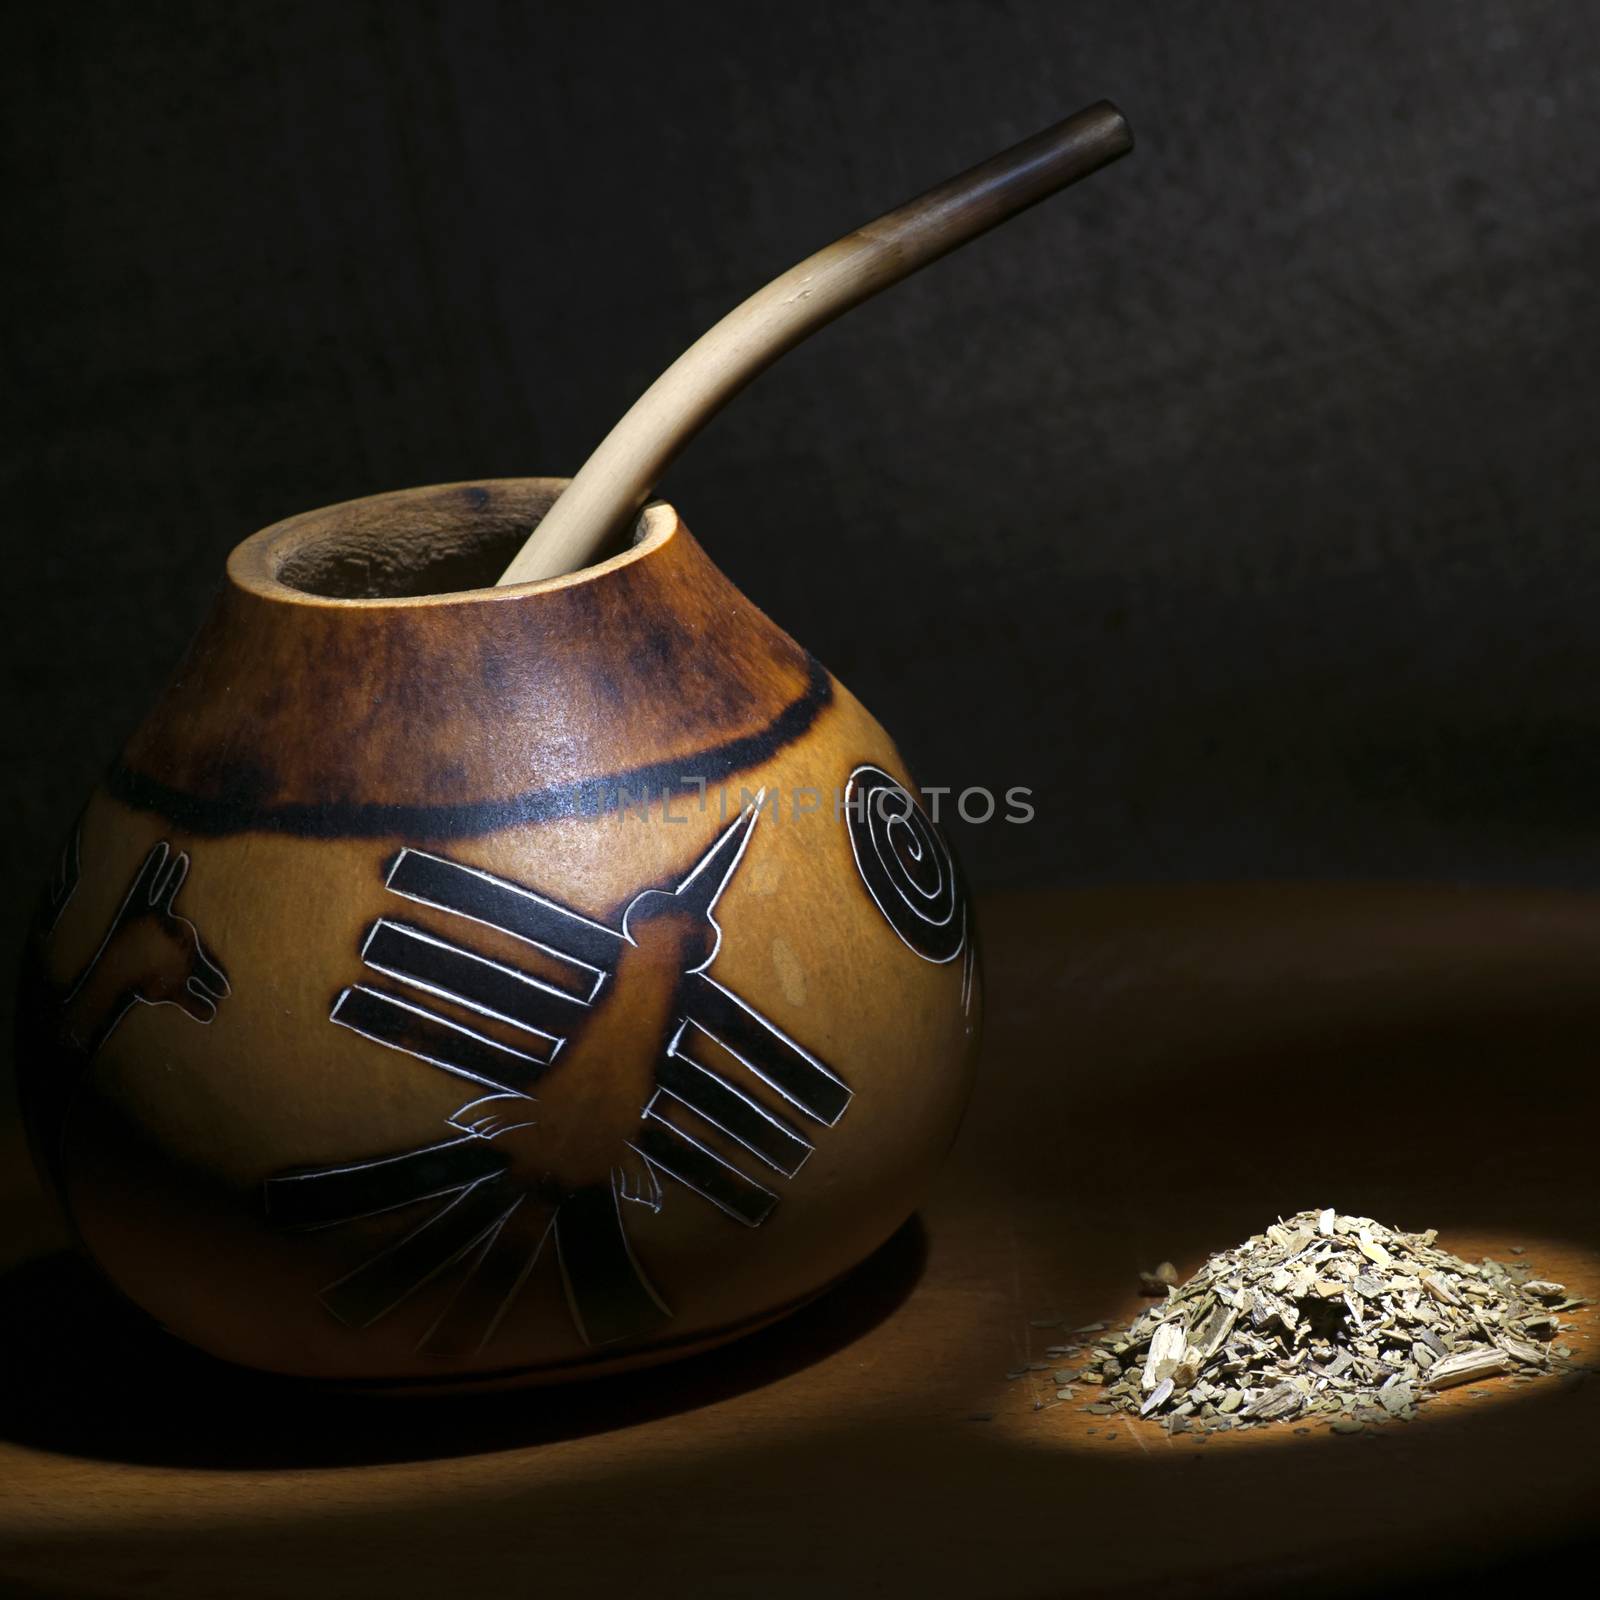 Traditional calabash gourd and yerba mate still life light brush technique